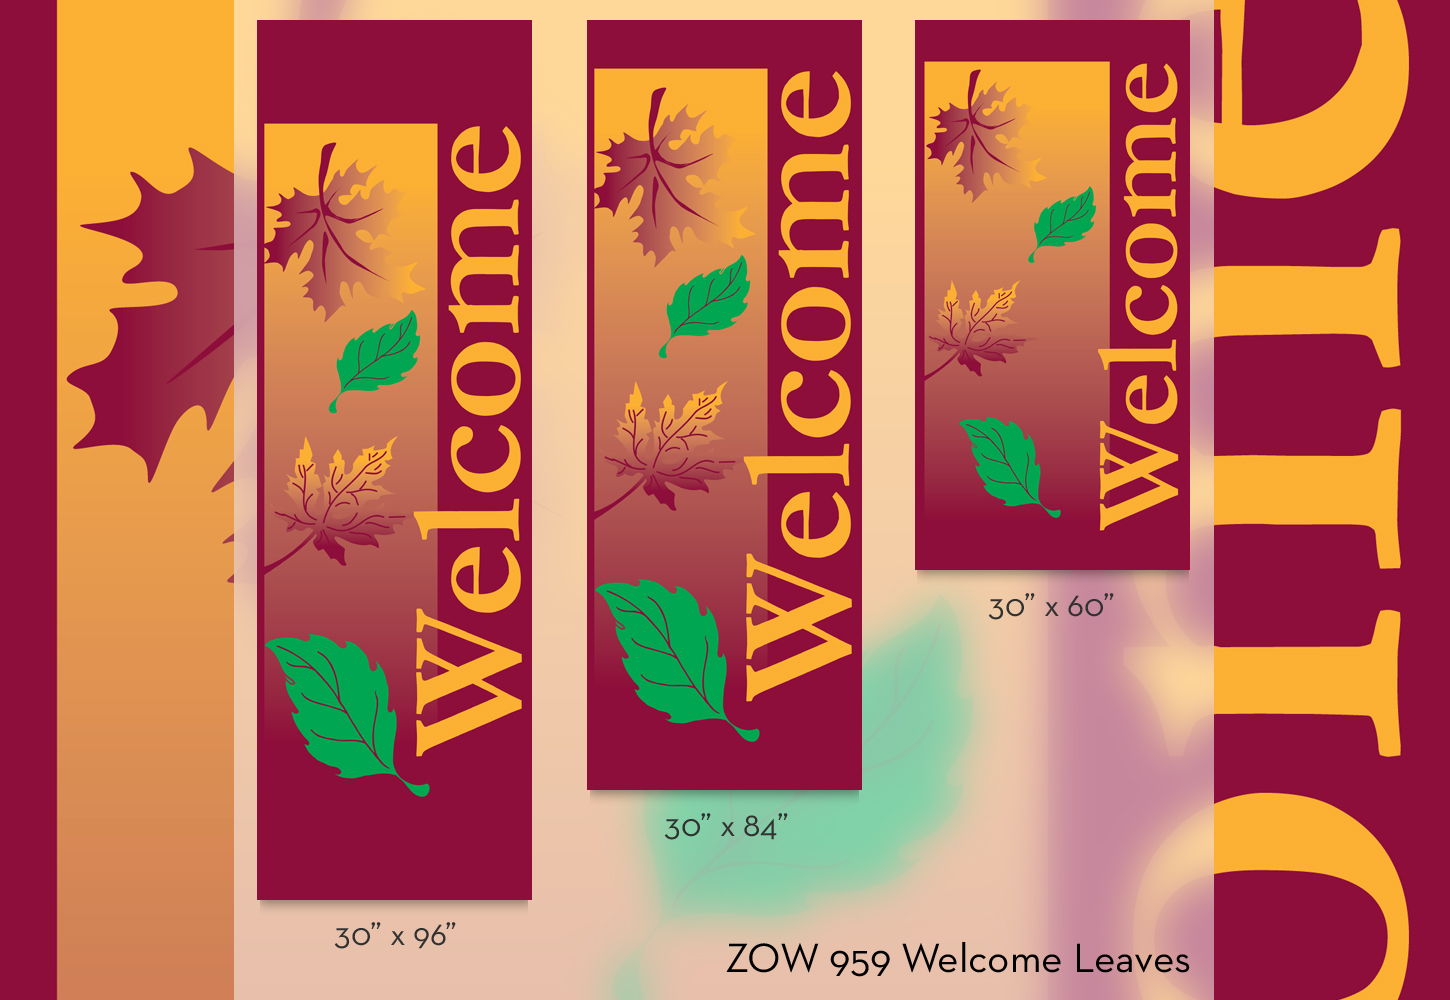 ZOW 959 Welcome Leaves